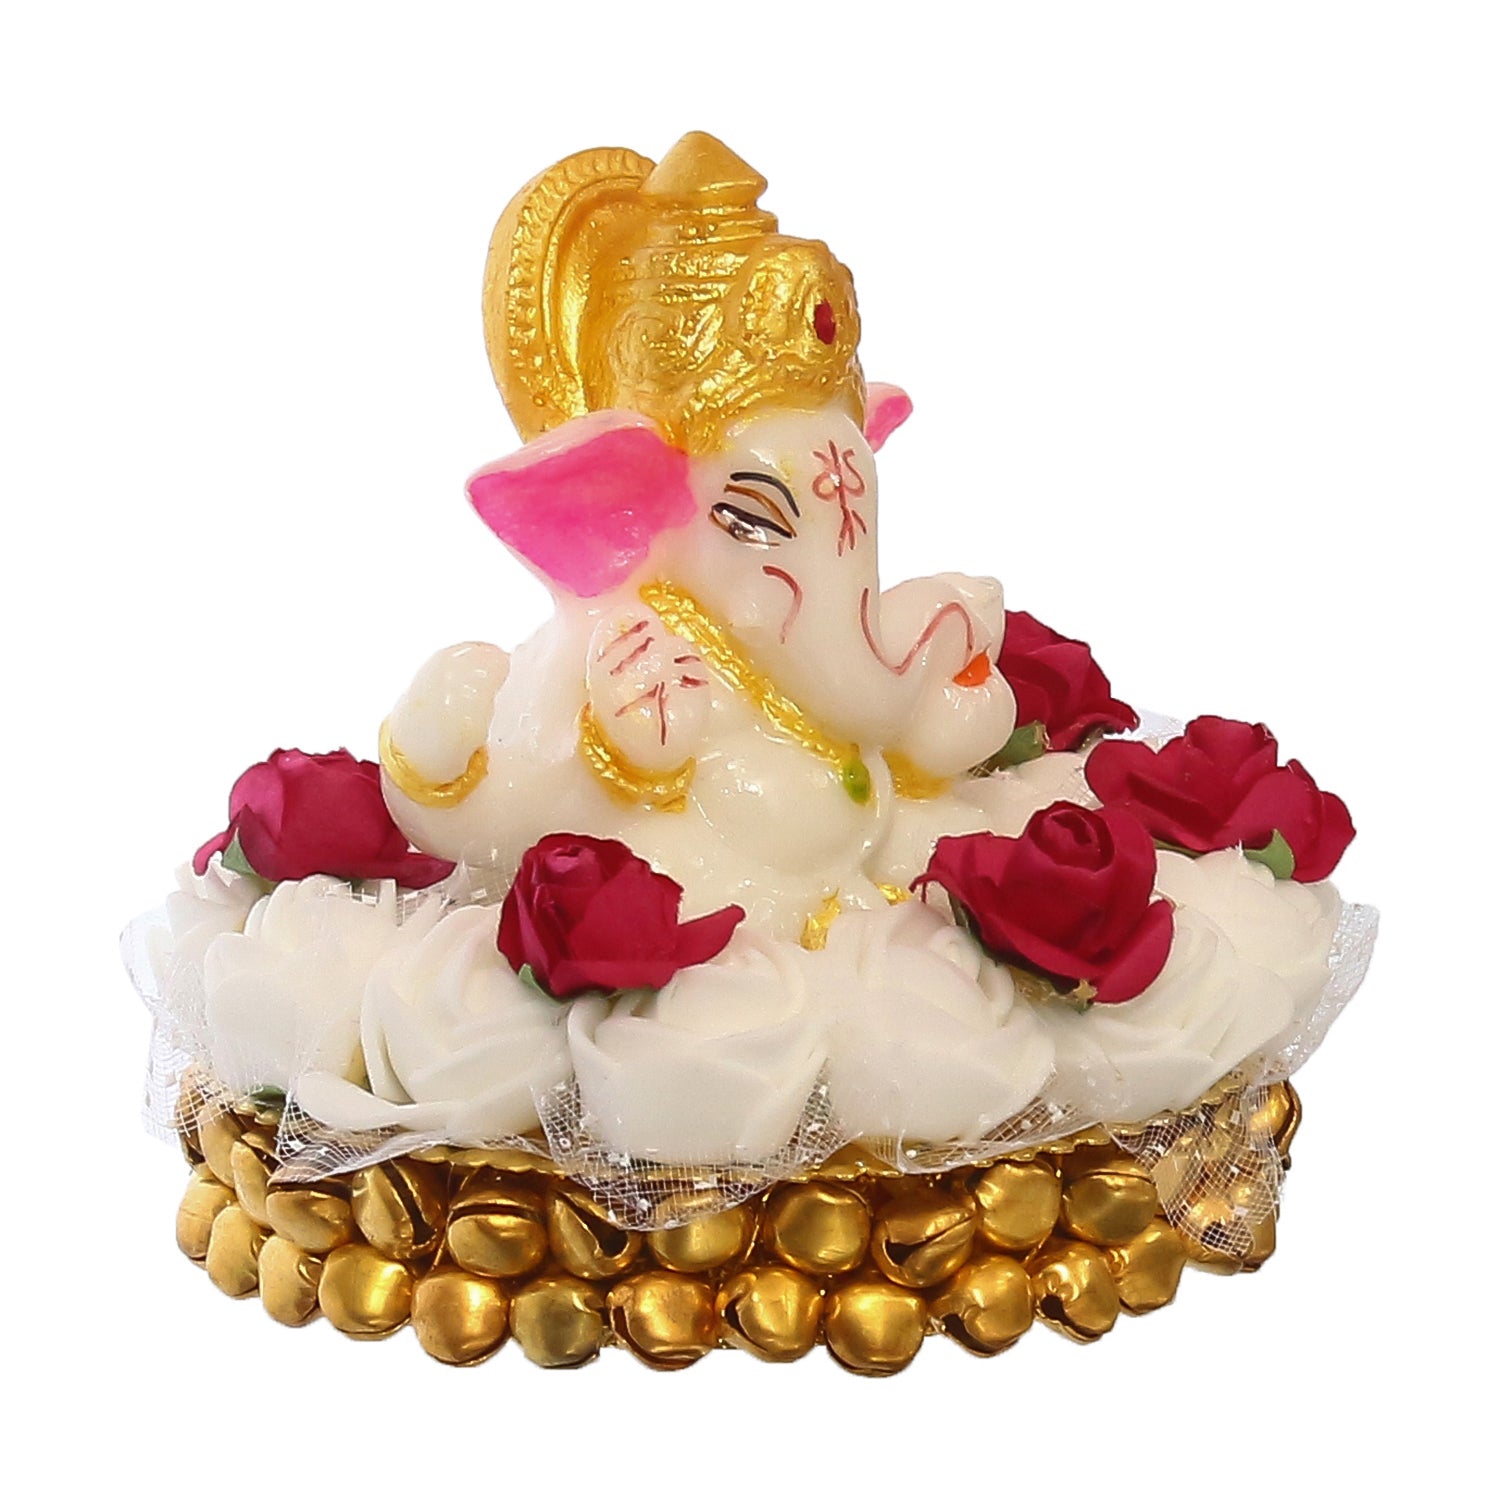 Lord Ganesha Idol on Decorative Handcrafted Plate with White Flowers 4